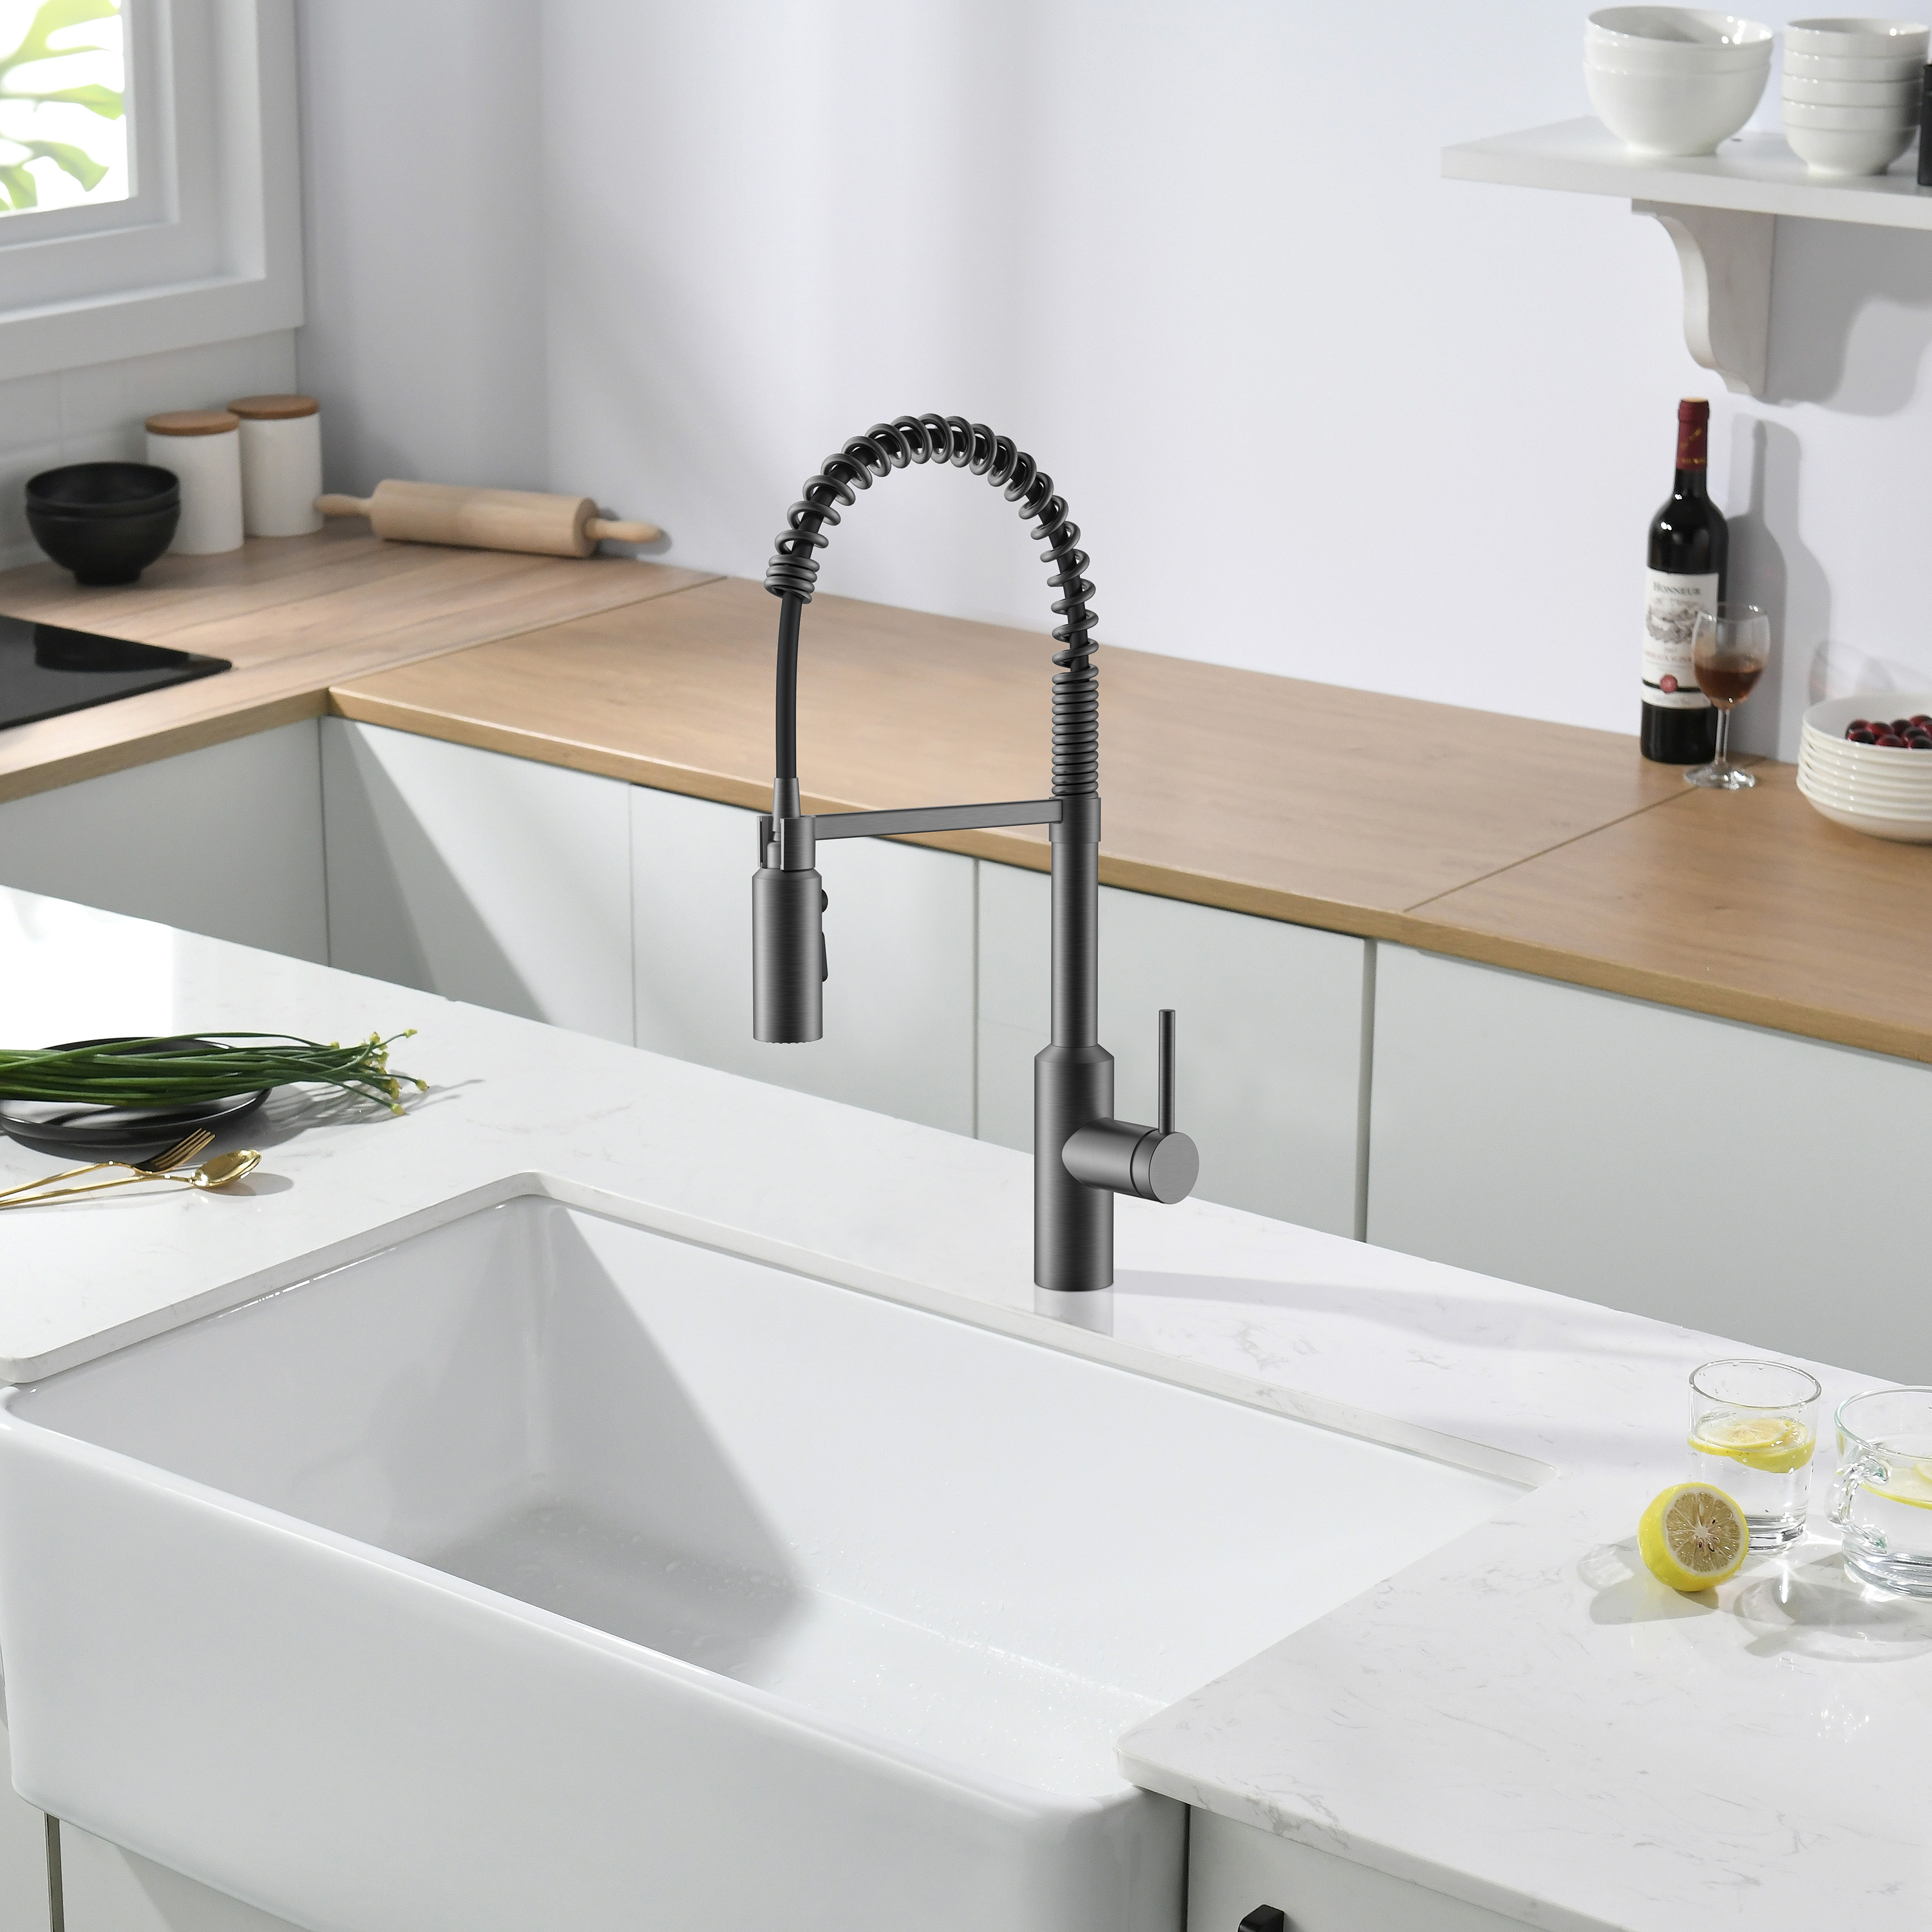 Brushed Nickel Pull Down Kitchen Faucet Modern Kitchen Faucet